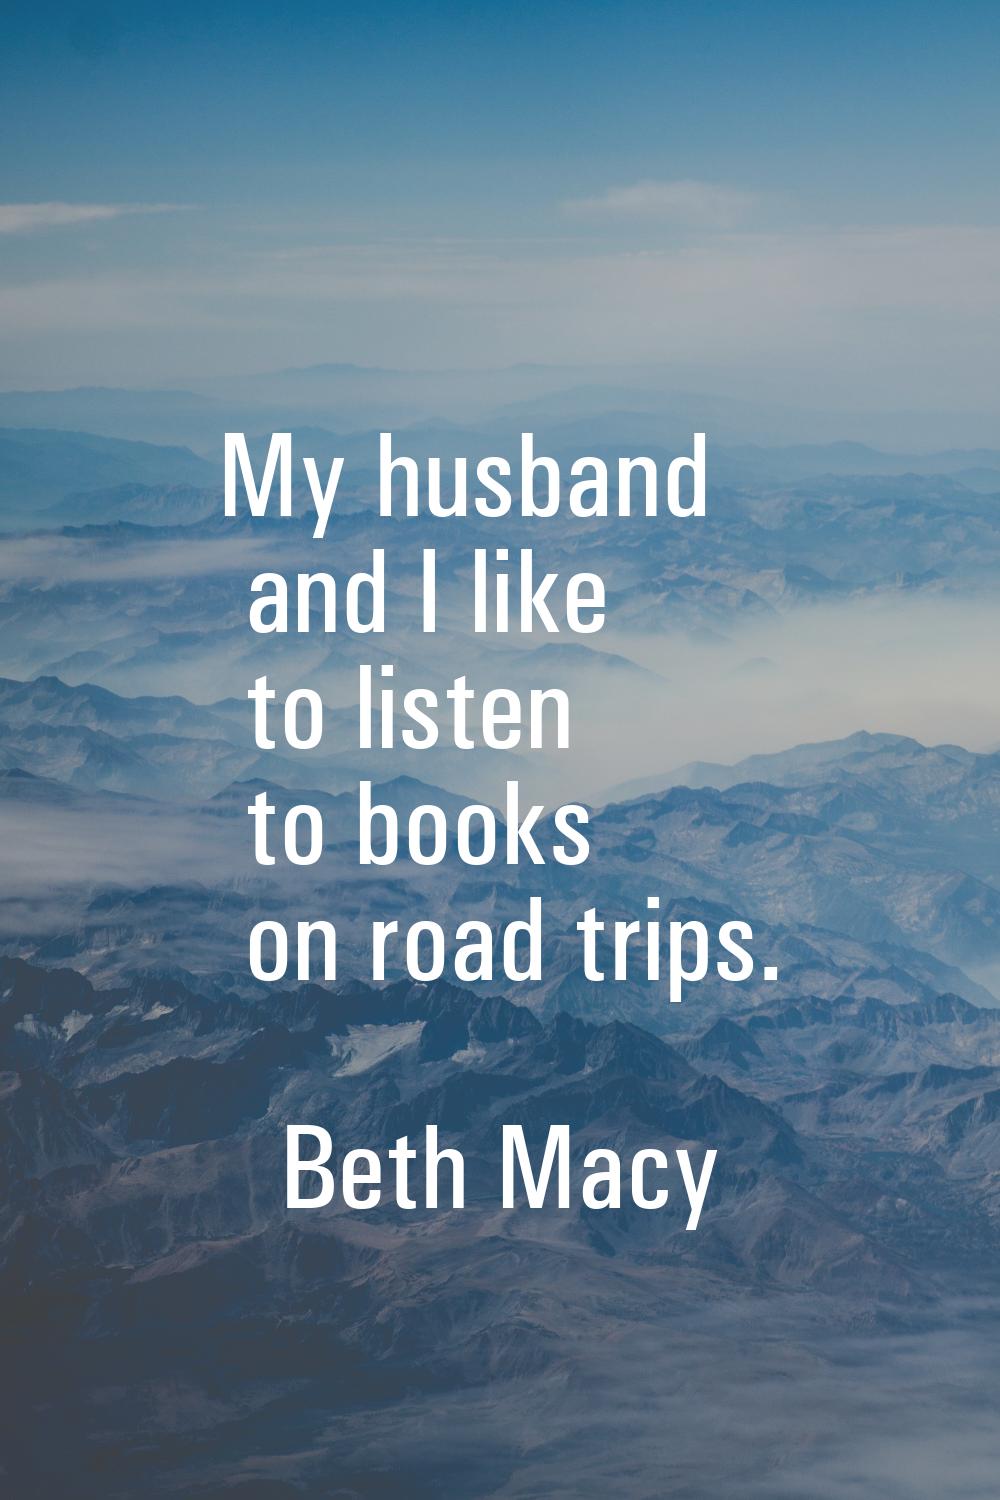 My husband and I like to listen to books on road trips.